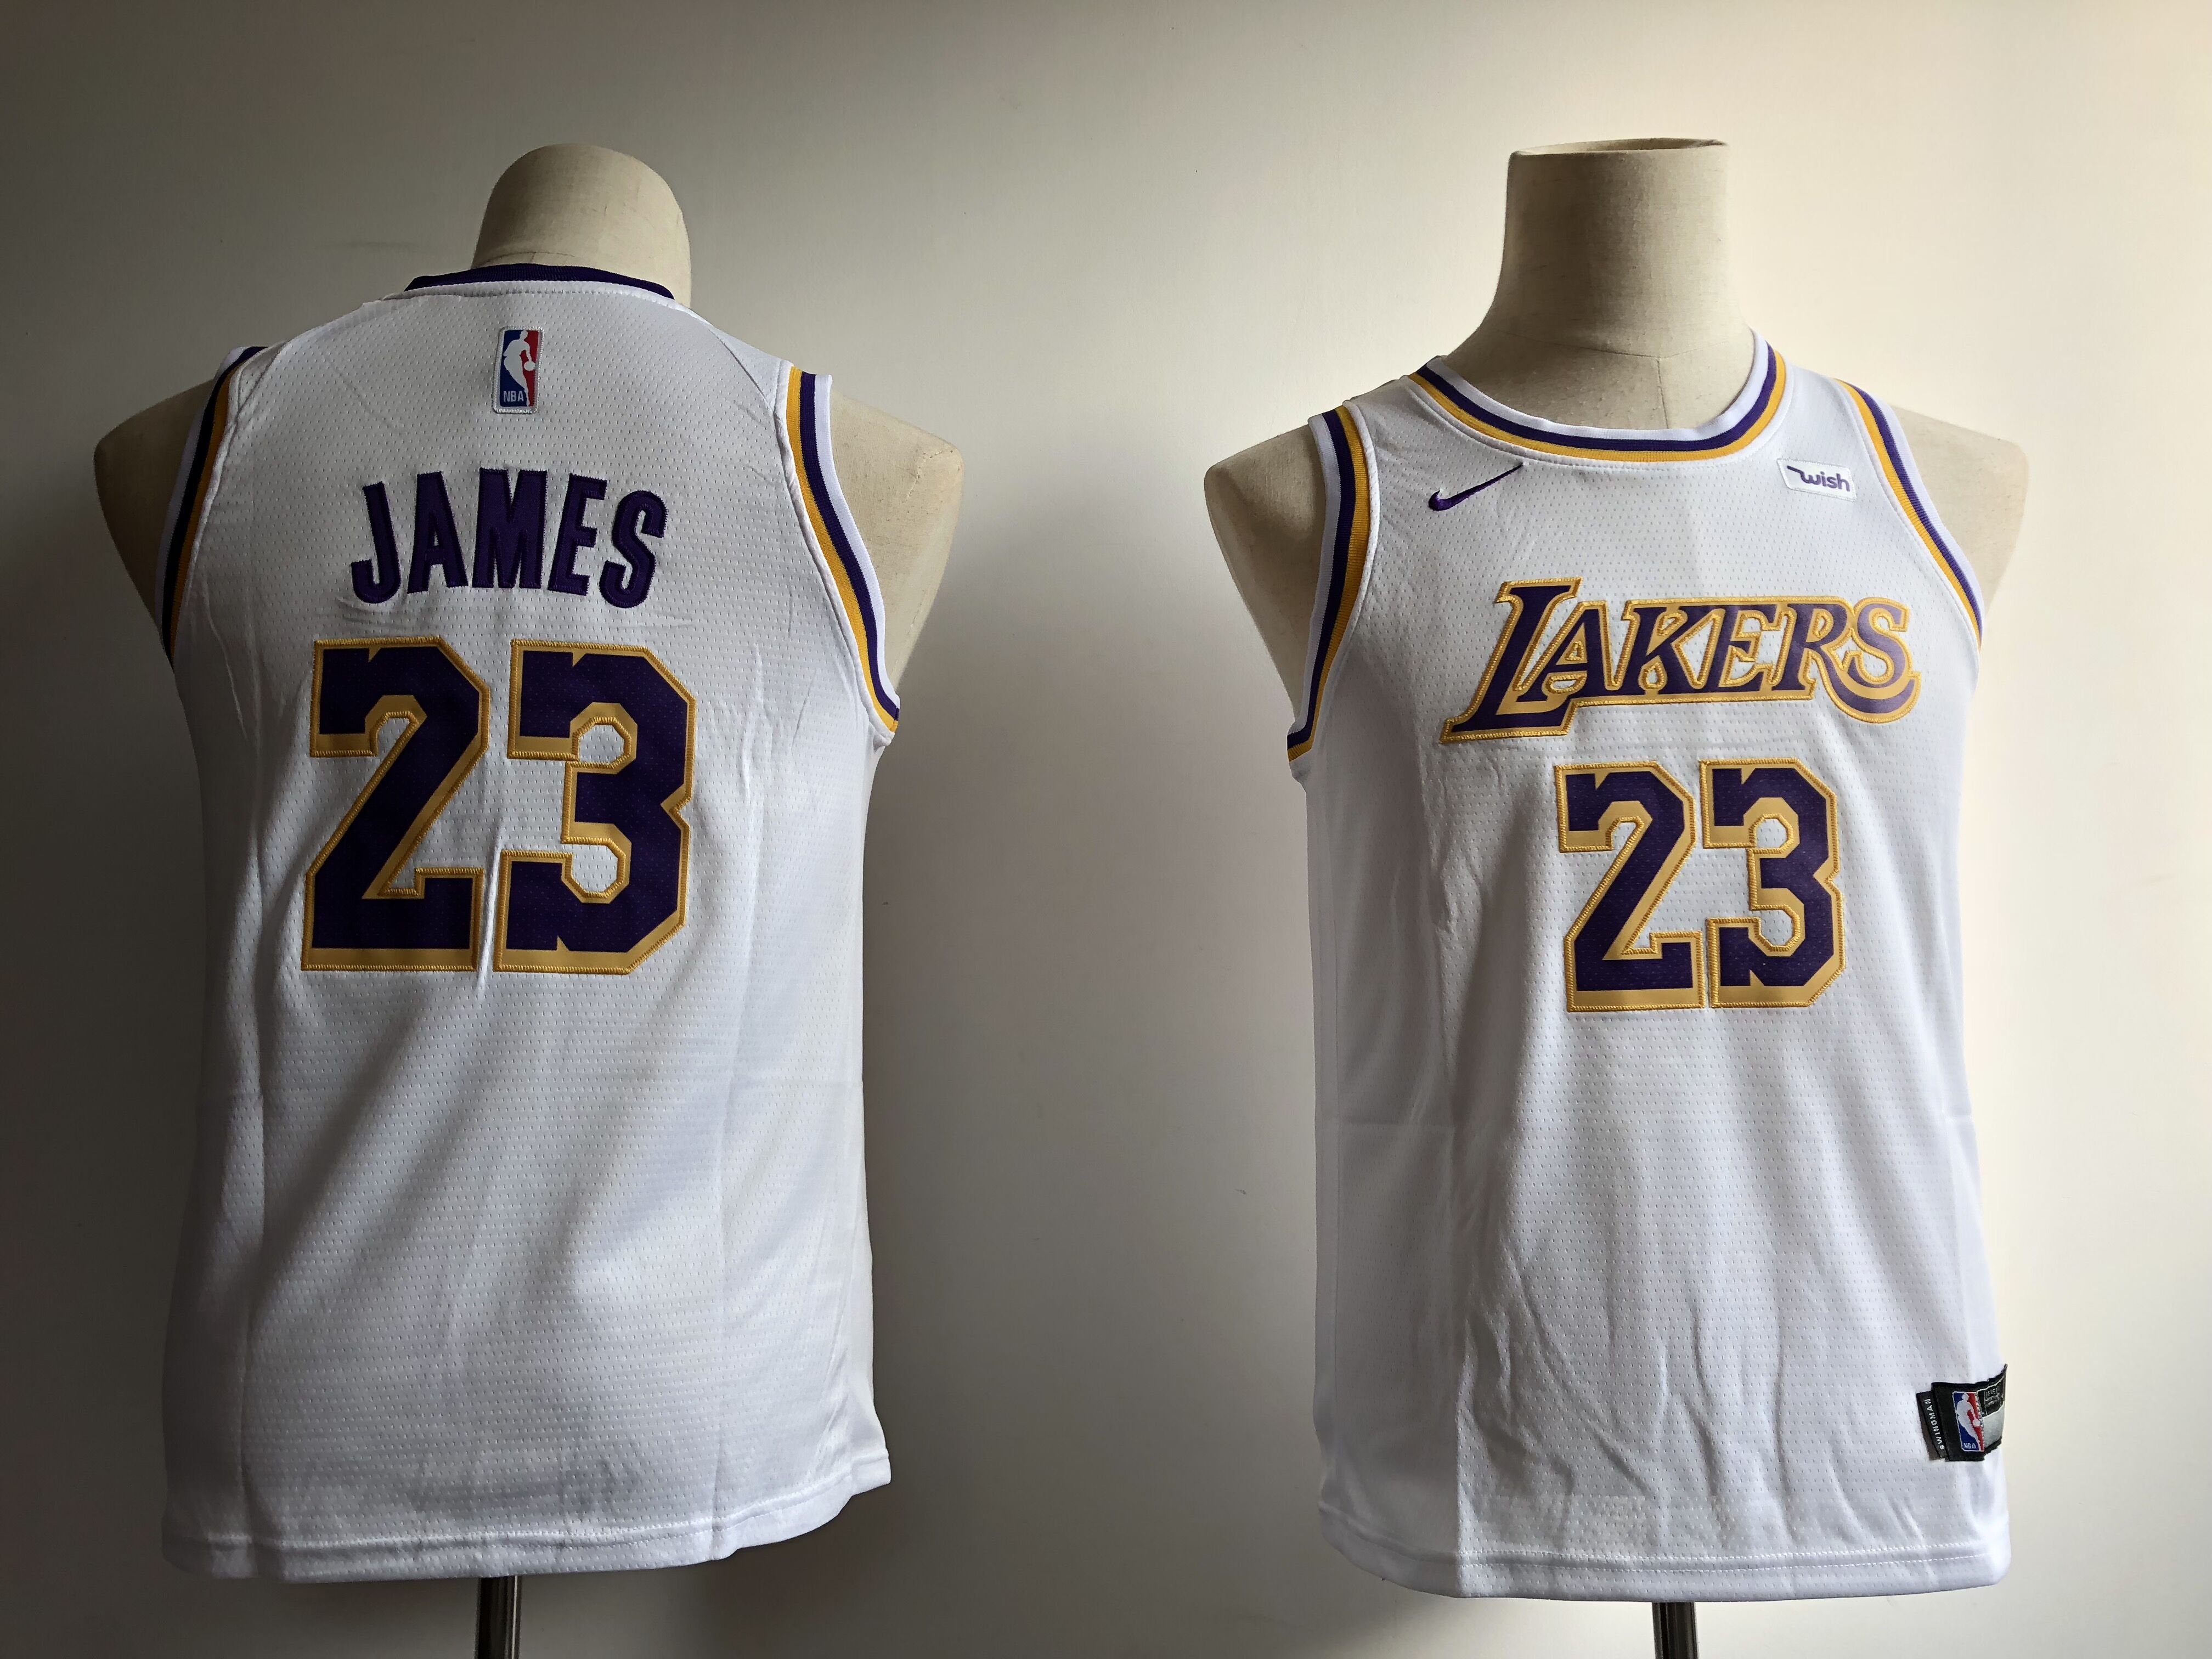 Youth Los Angeles Lakers #23 James white Nike NBA Jerseys->los angeles chargers->NFL Jersey